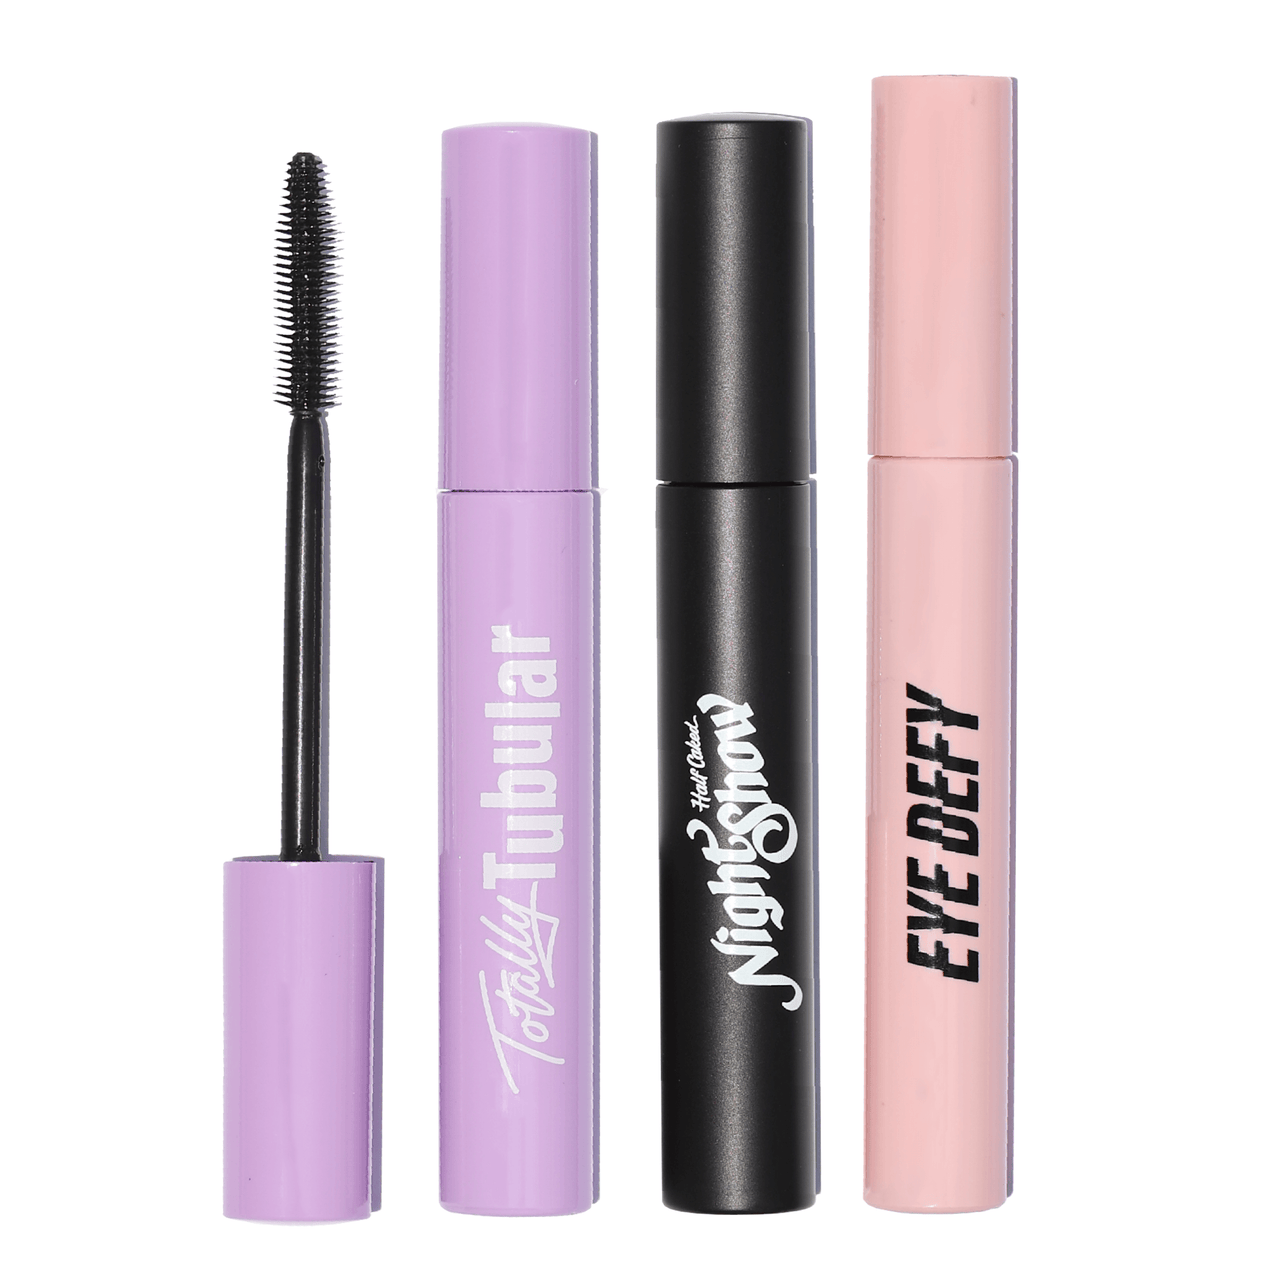 Mascara Bundle featuring Totally Tubular in purple, Night Show in black, and Eye Defy in pink tubes.